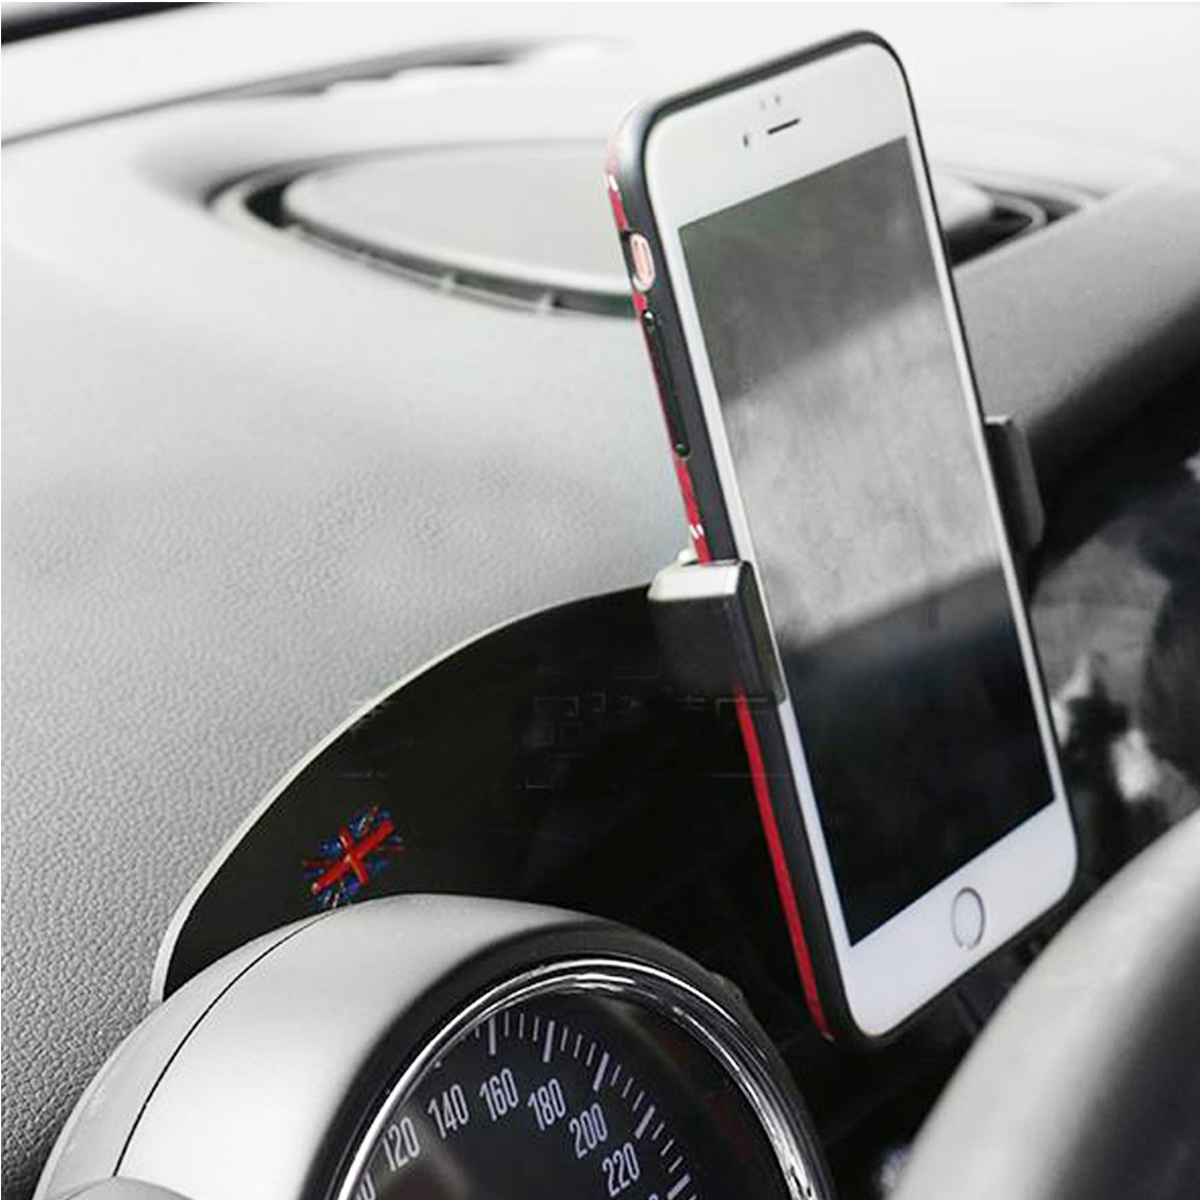 Bakeey-360deg-Rotation-Car-Phone-Mount-Cradle-Holder-Stand-for-Mini-Cooper-R60R61-F54F55F56-R55R56-F-1633190-11